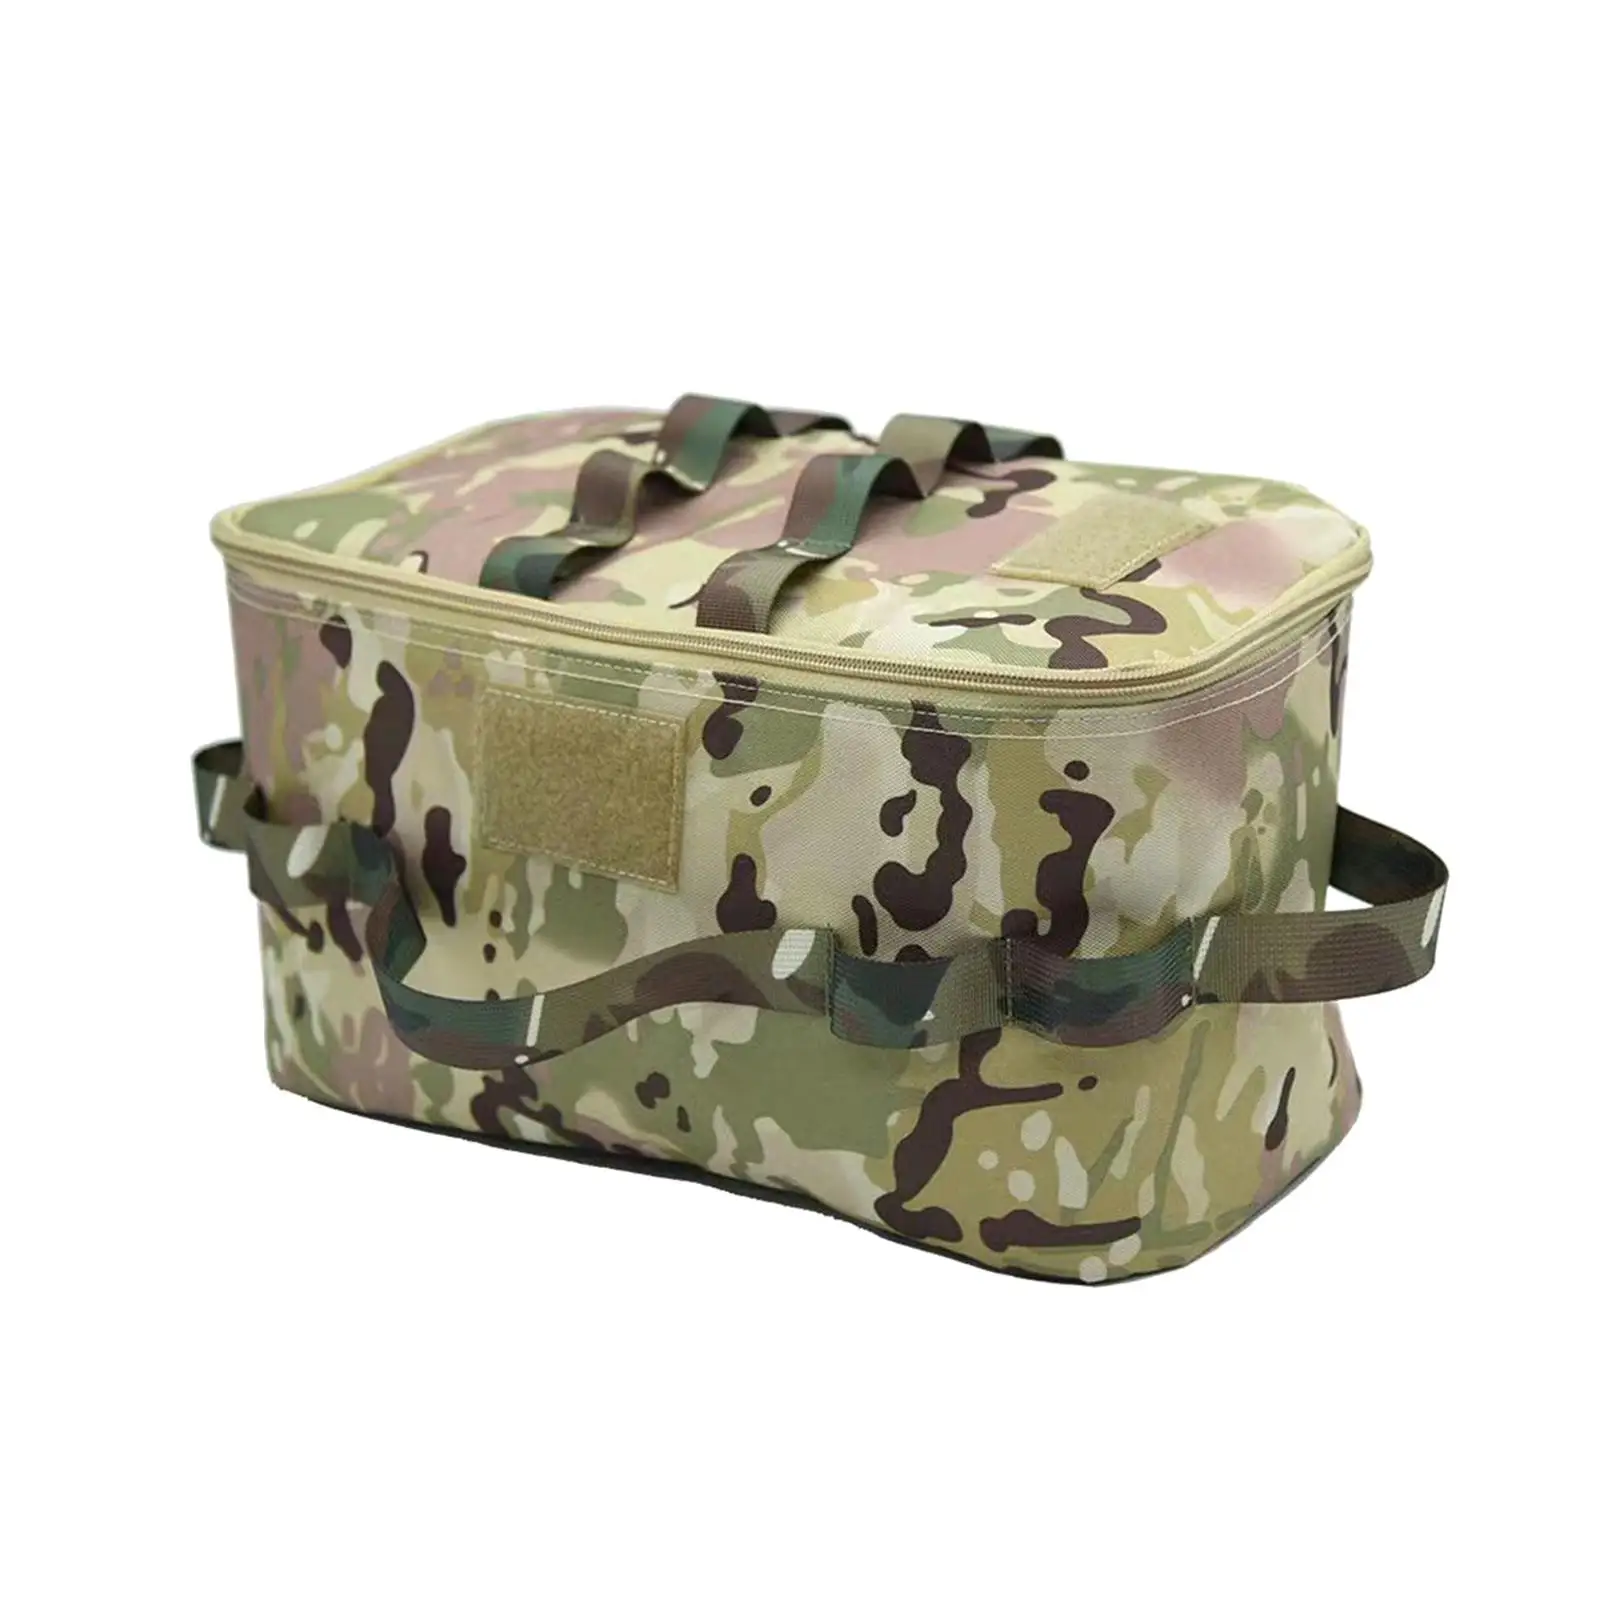 Camping Storage Bag Cookware Carrying Case Zipper Closure for Picnic